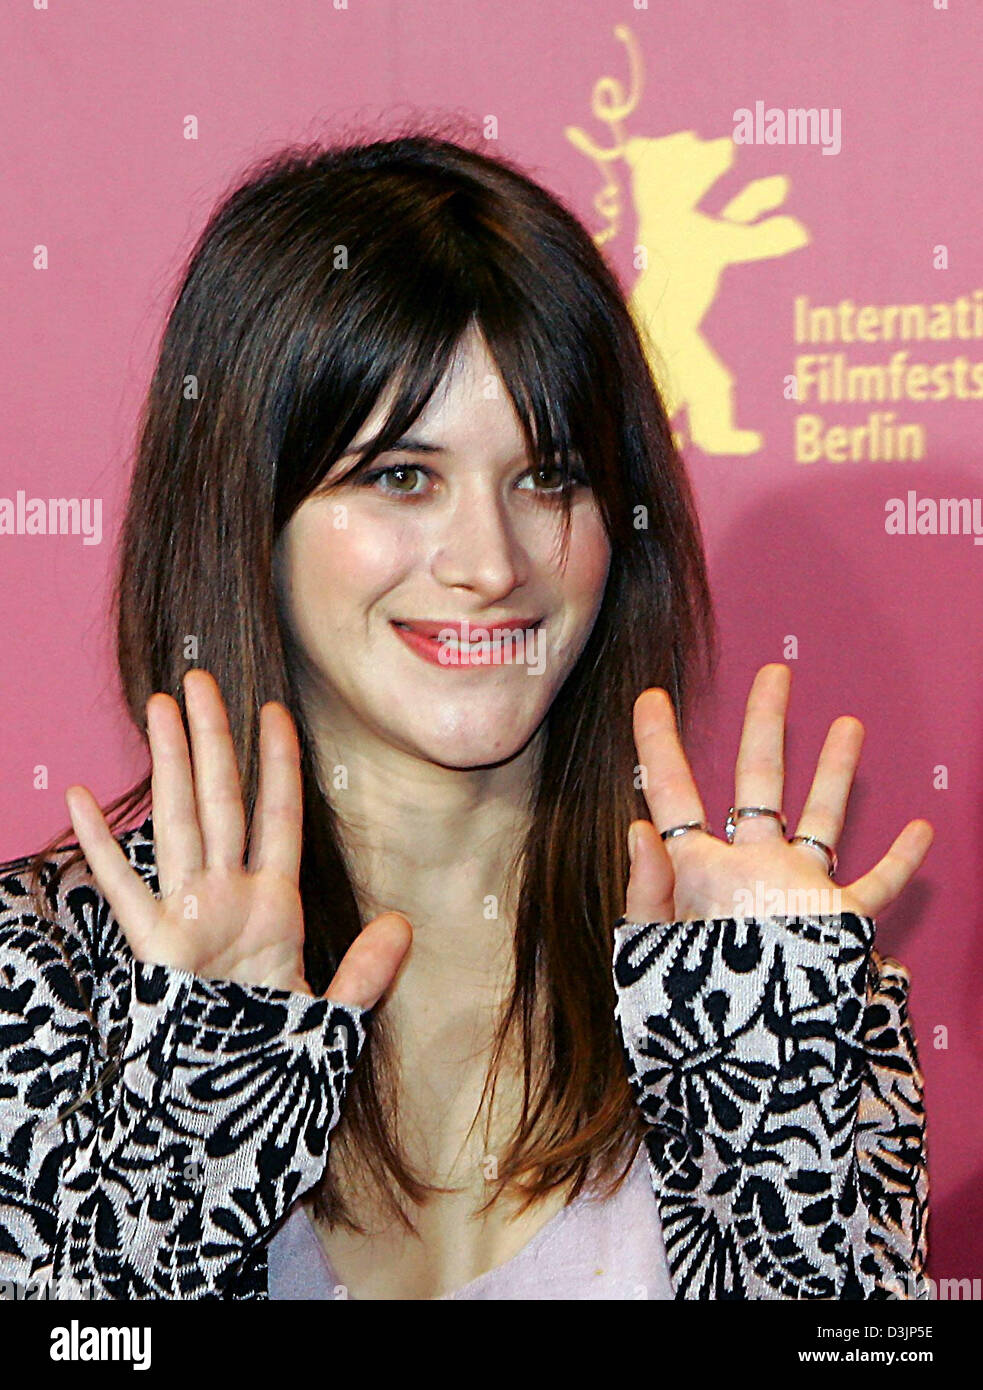 (dpa) - Italian actress Valentina Cervi arrives for the presentation of her film 'Provincia Meccanica' during the 55th Berlinale international film festival in Berlin, Germany, 12 February 2005. A total of 21 films compete for the Golden and Silver Bear prizes at the Berlinale. Stock Photo